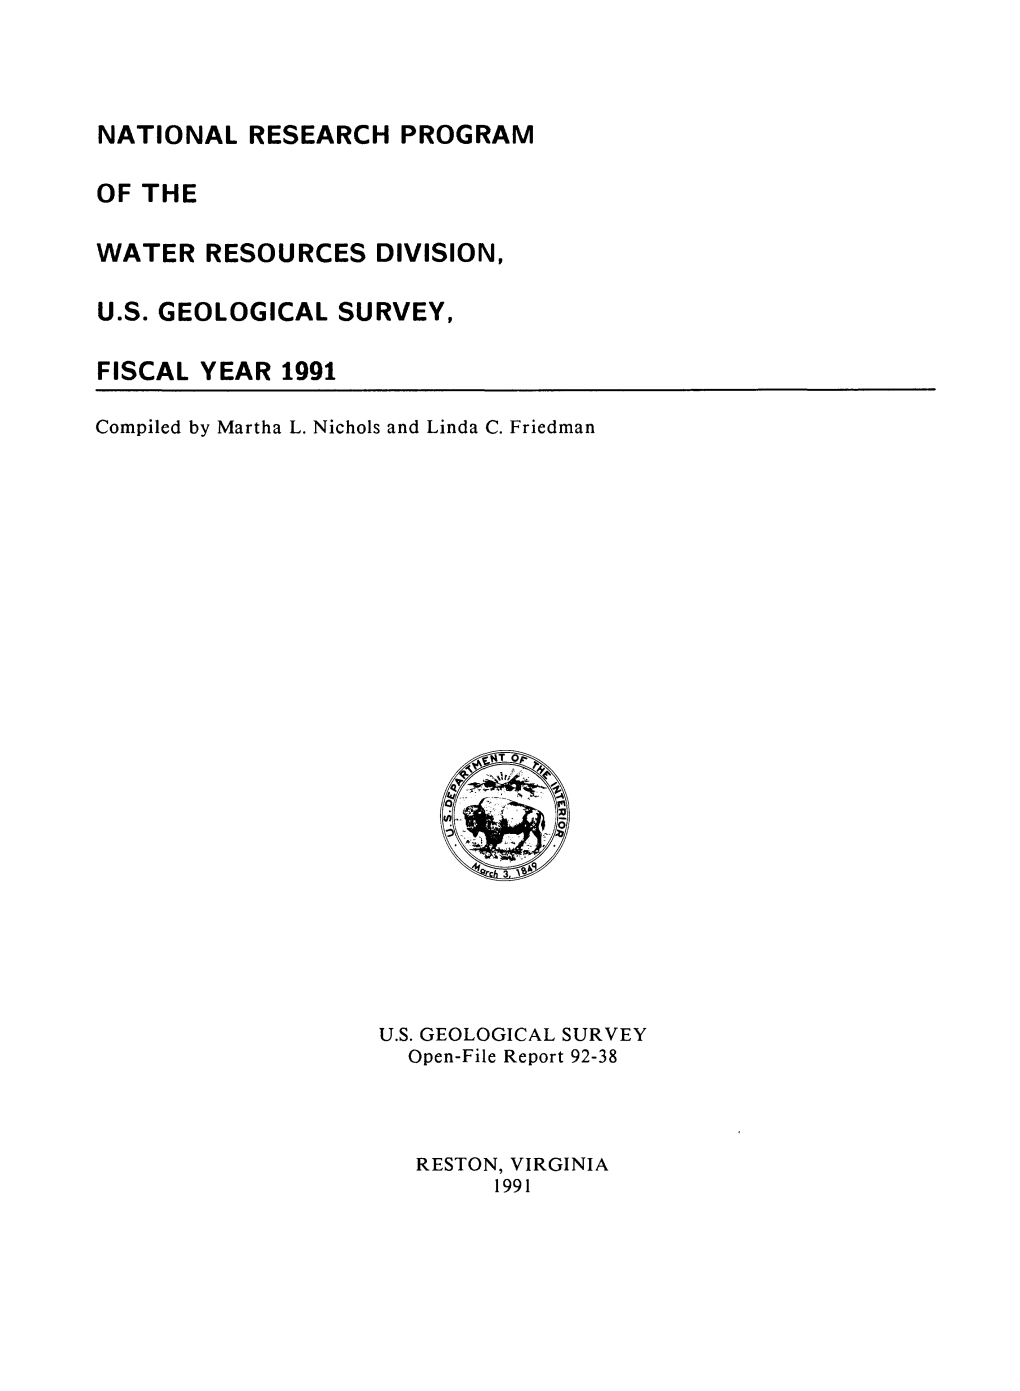 National Research Program of the Water Resources Division, U.S. Geological Survey, Fiscal Year 1991